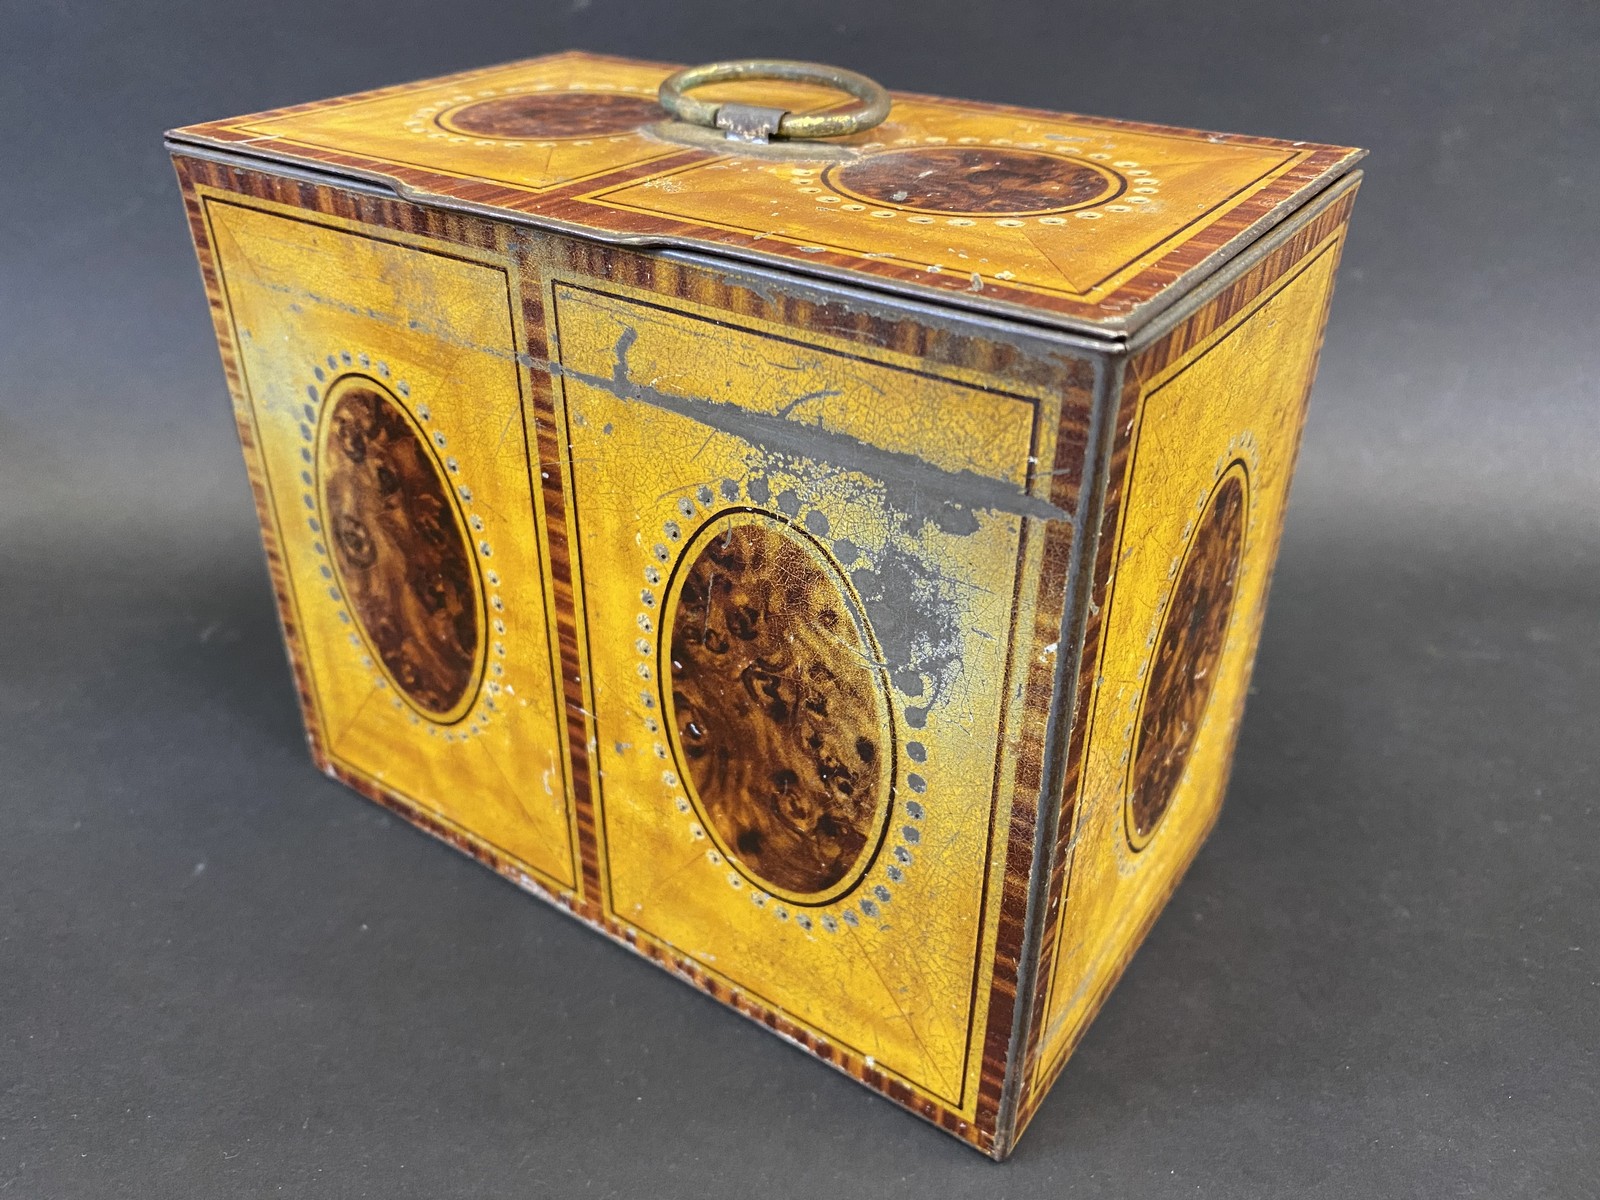 A William Crawford & Sons Ltd rectangular biscuit tin in the form of a Georgian tea caddy, with faux